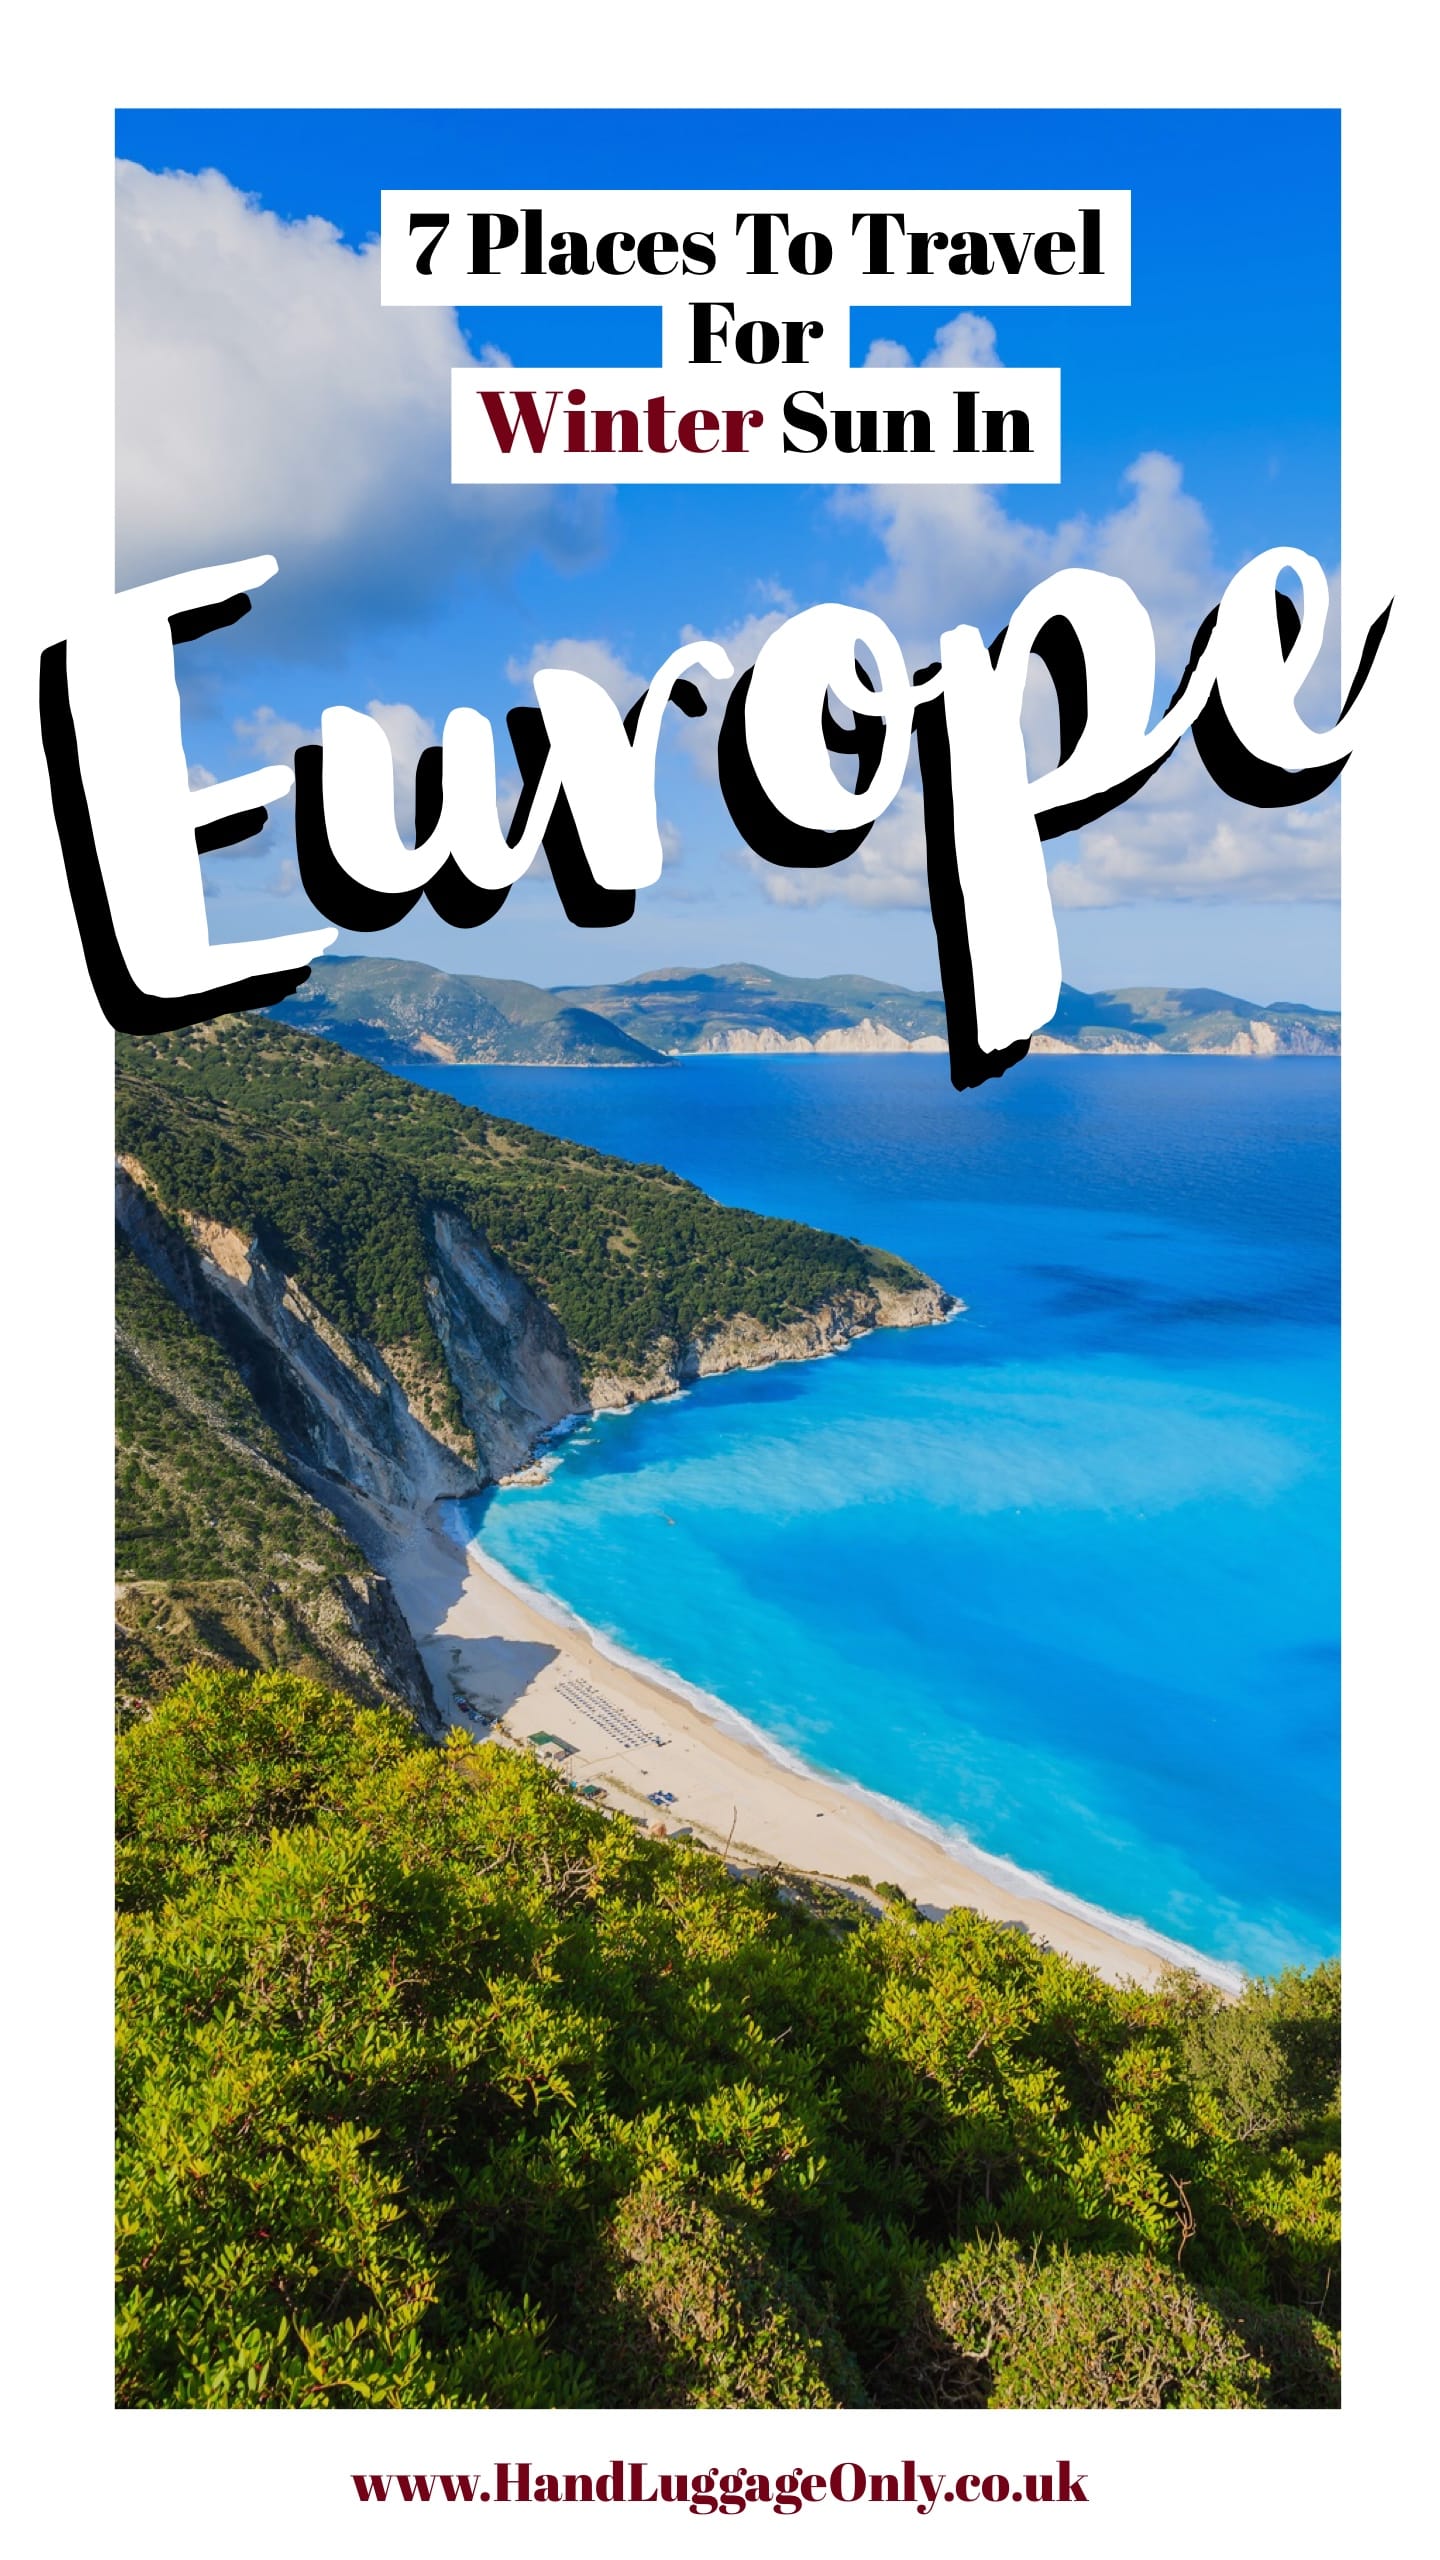 7 Places To Travel In Europe For Winter Sun - Hand Luggage Only - Travel, Food & Photography Blog